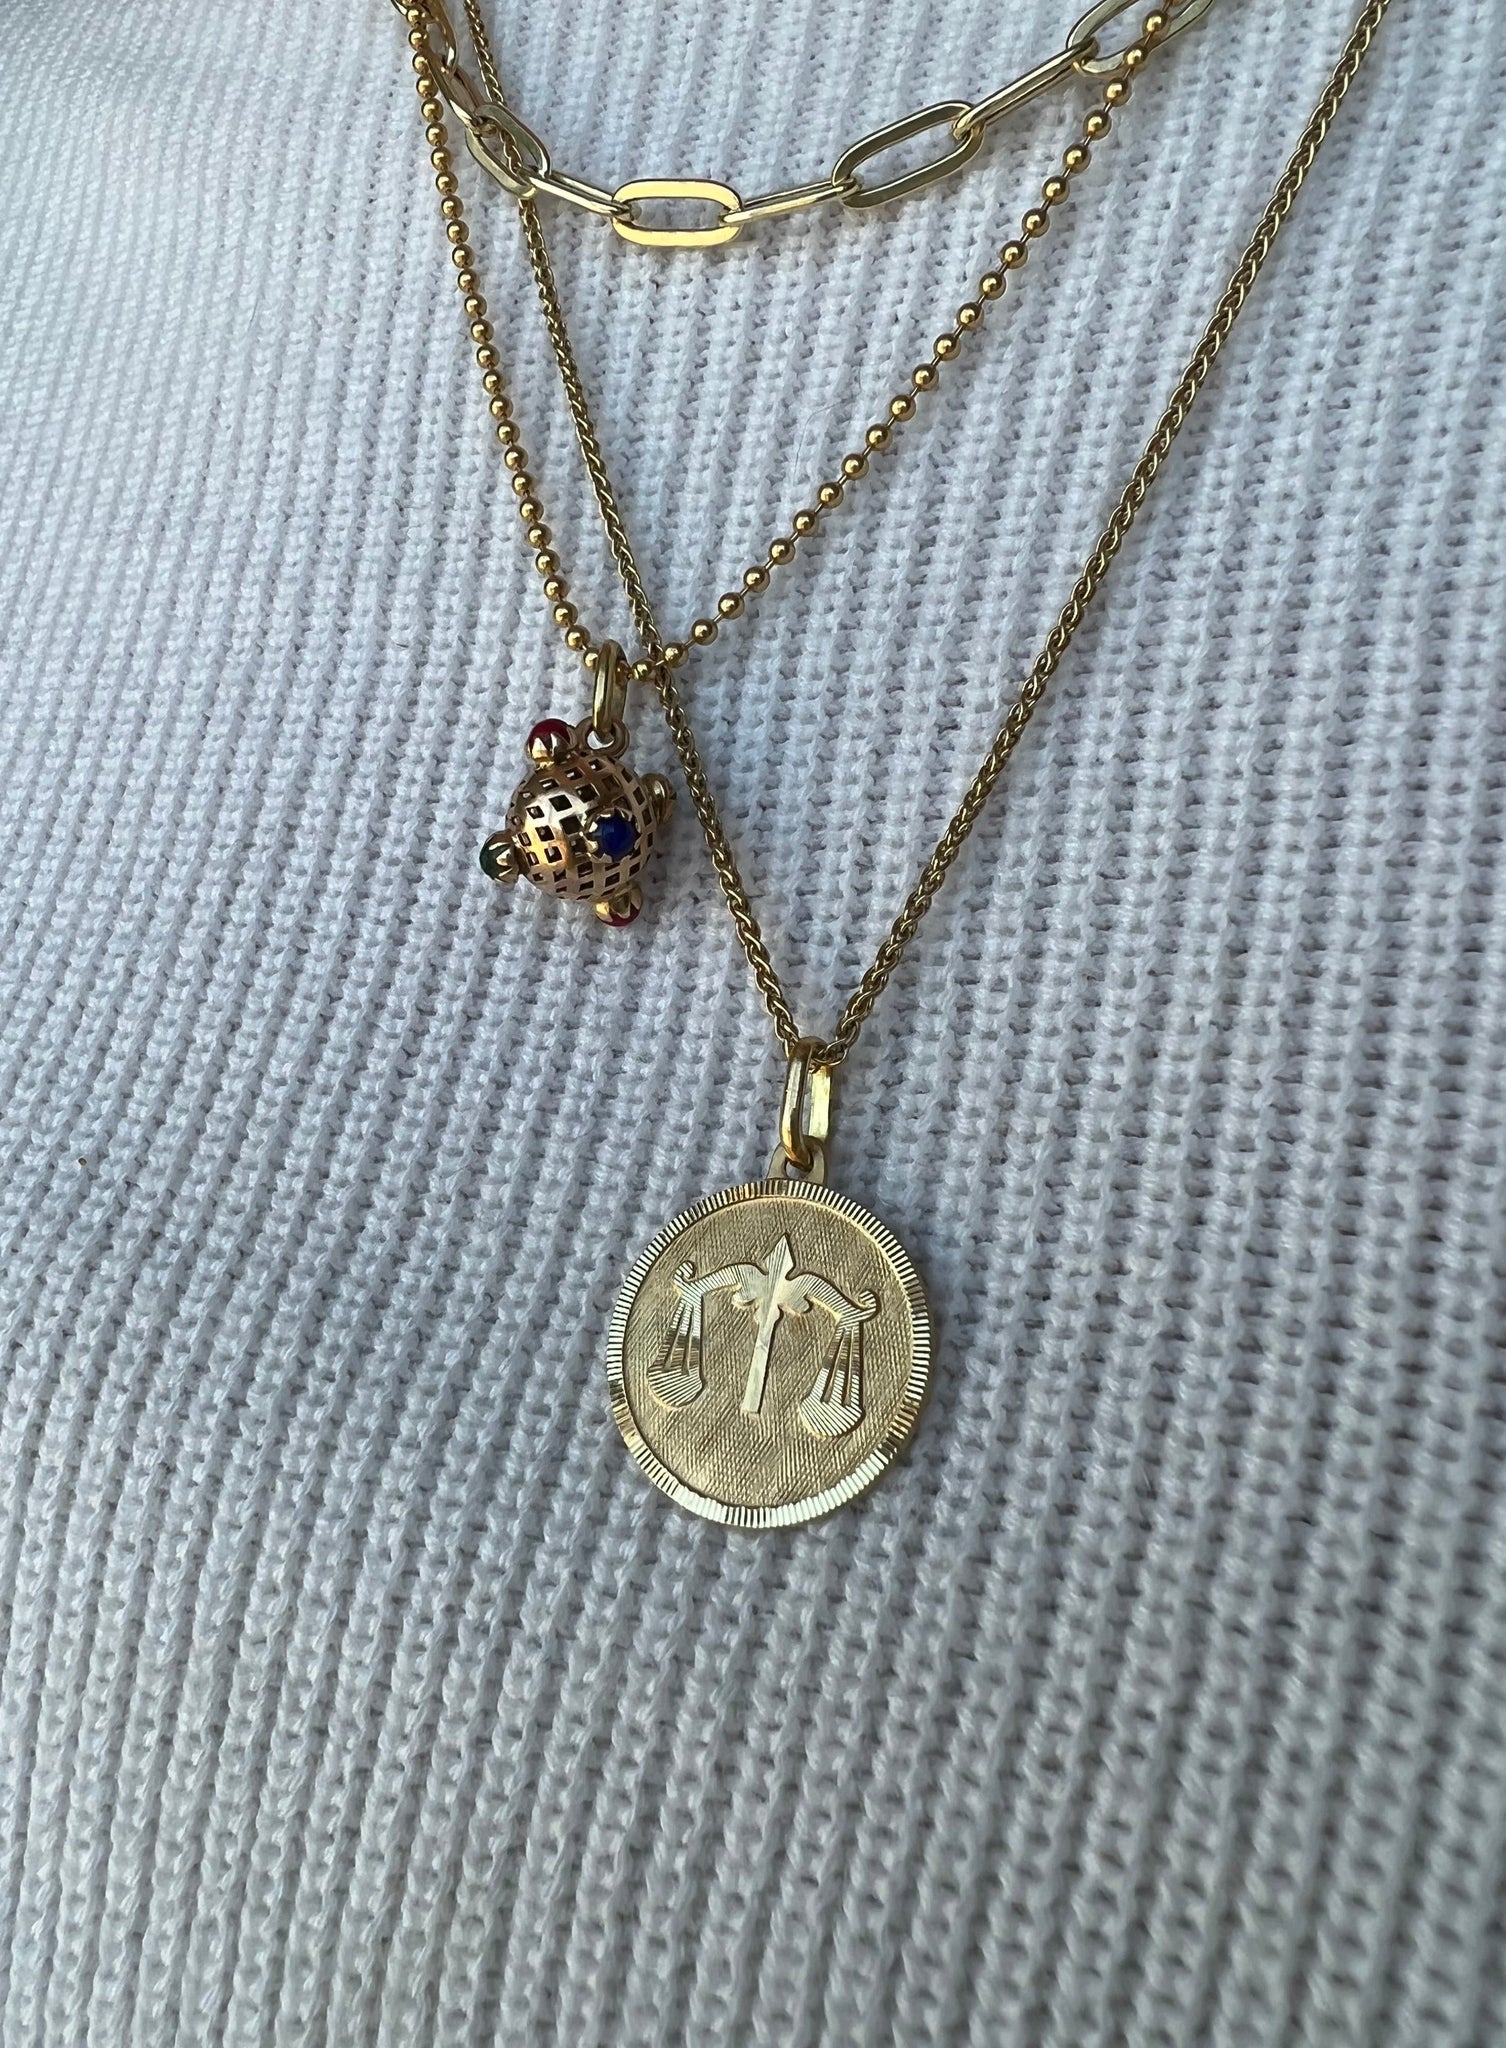 Lico Jewelry's stunning 18K yellow gold Libra medallion pendant, paired with other gold necklaces and charms